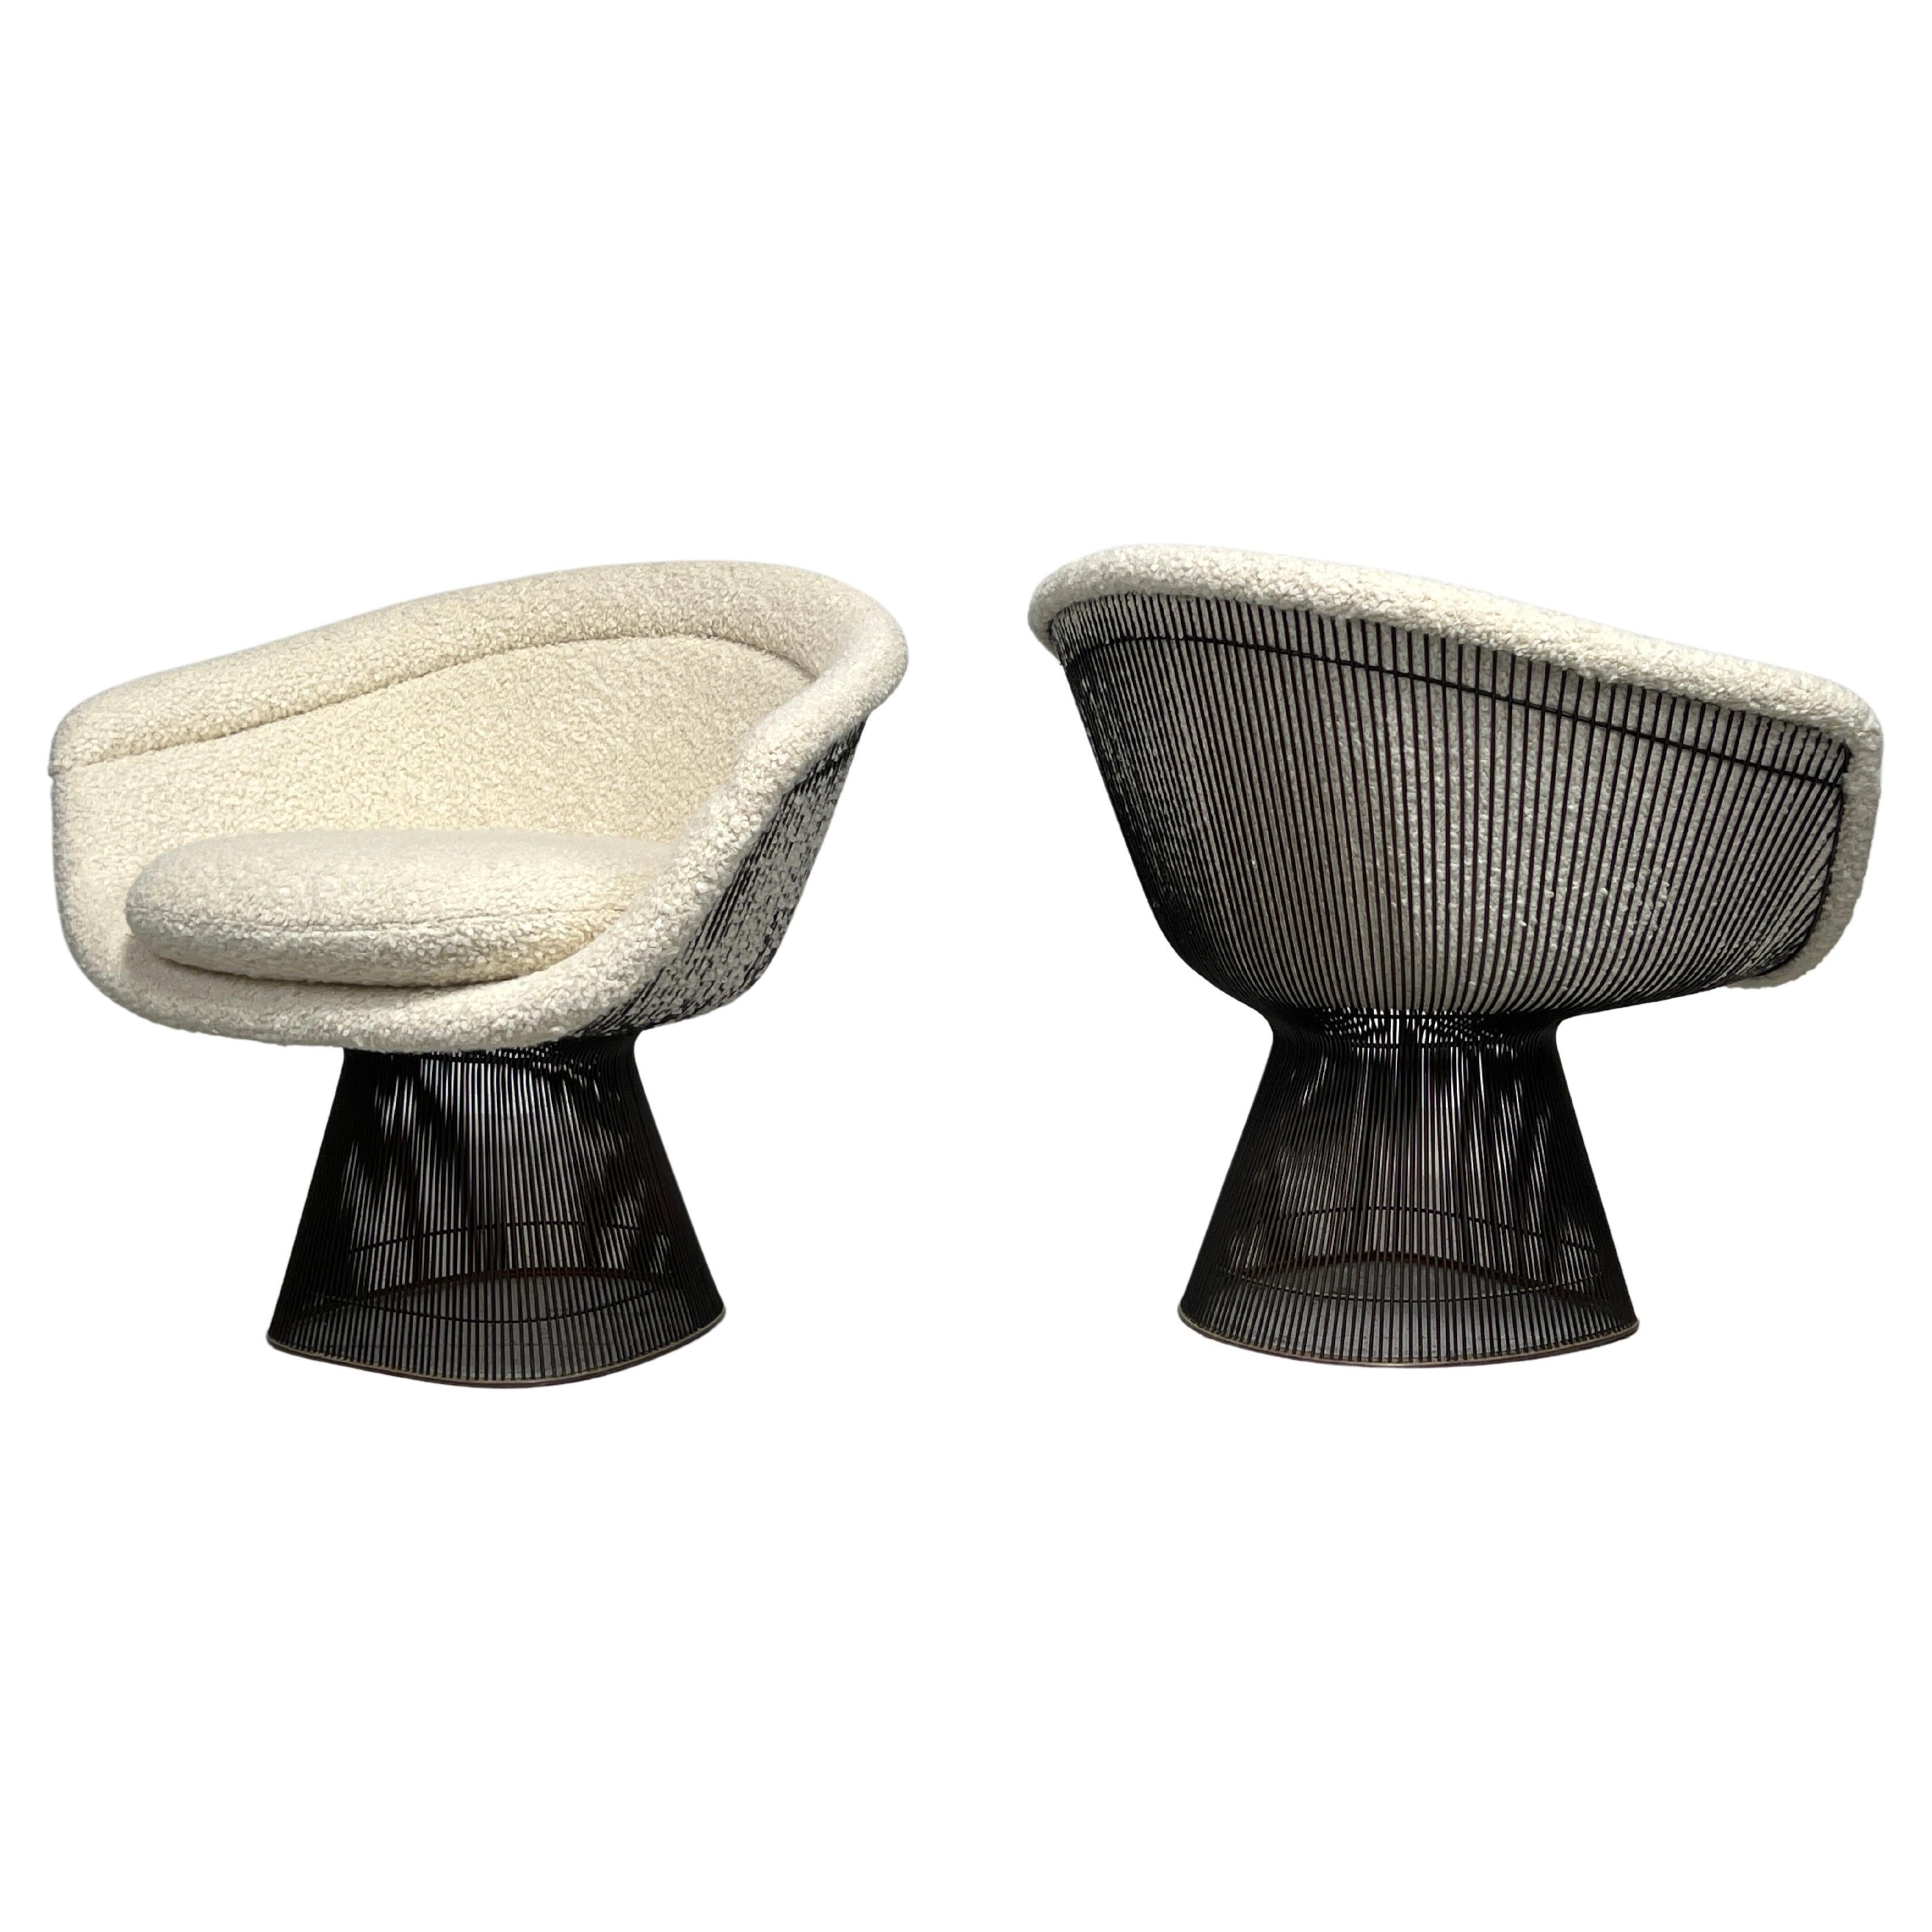 Pair of Bronze Warren Platner Lounge Chairs for Knoll